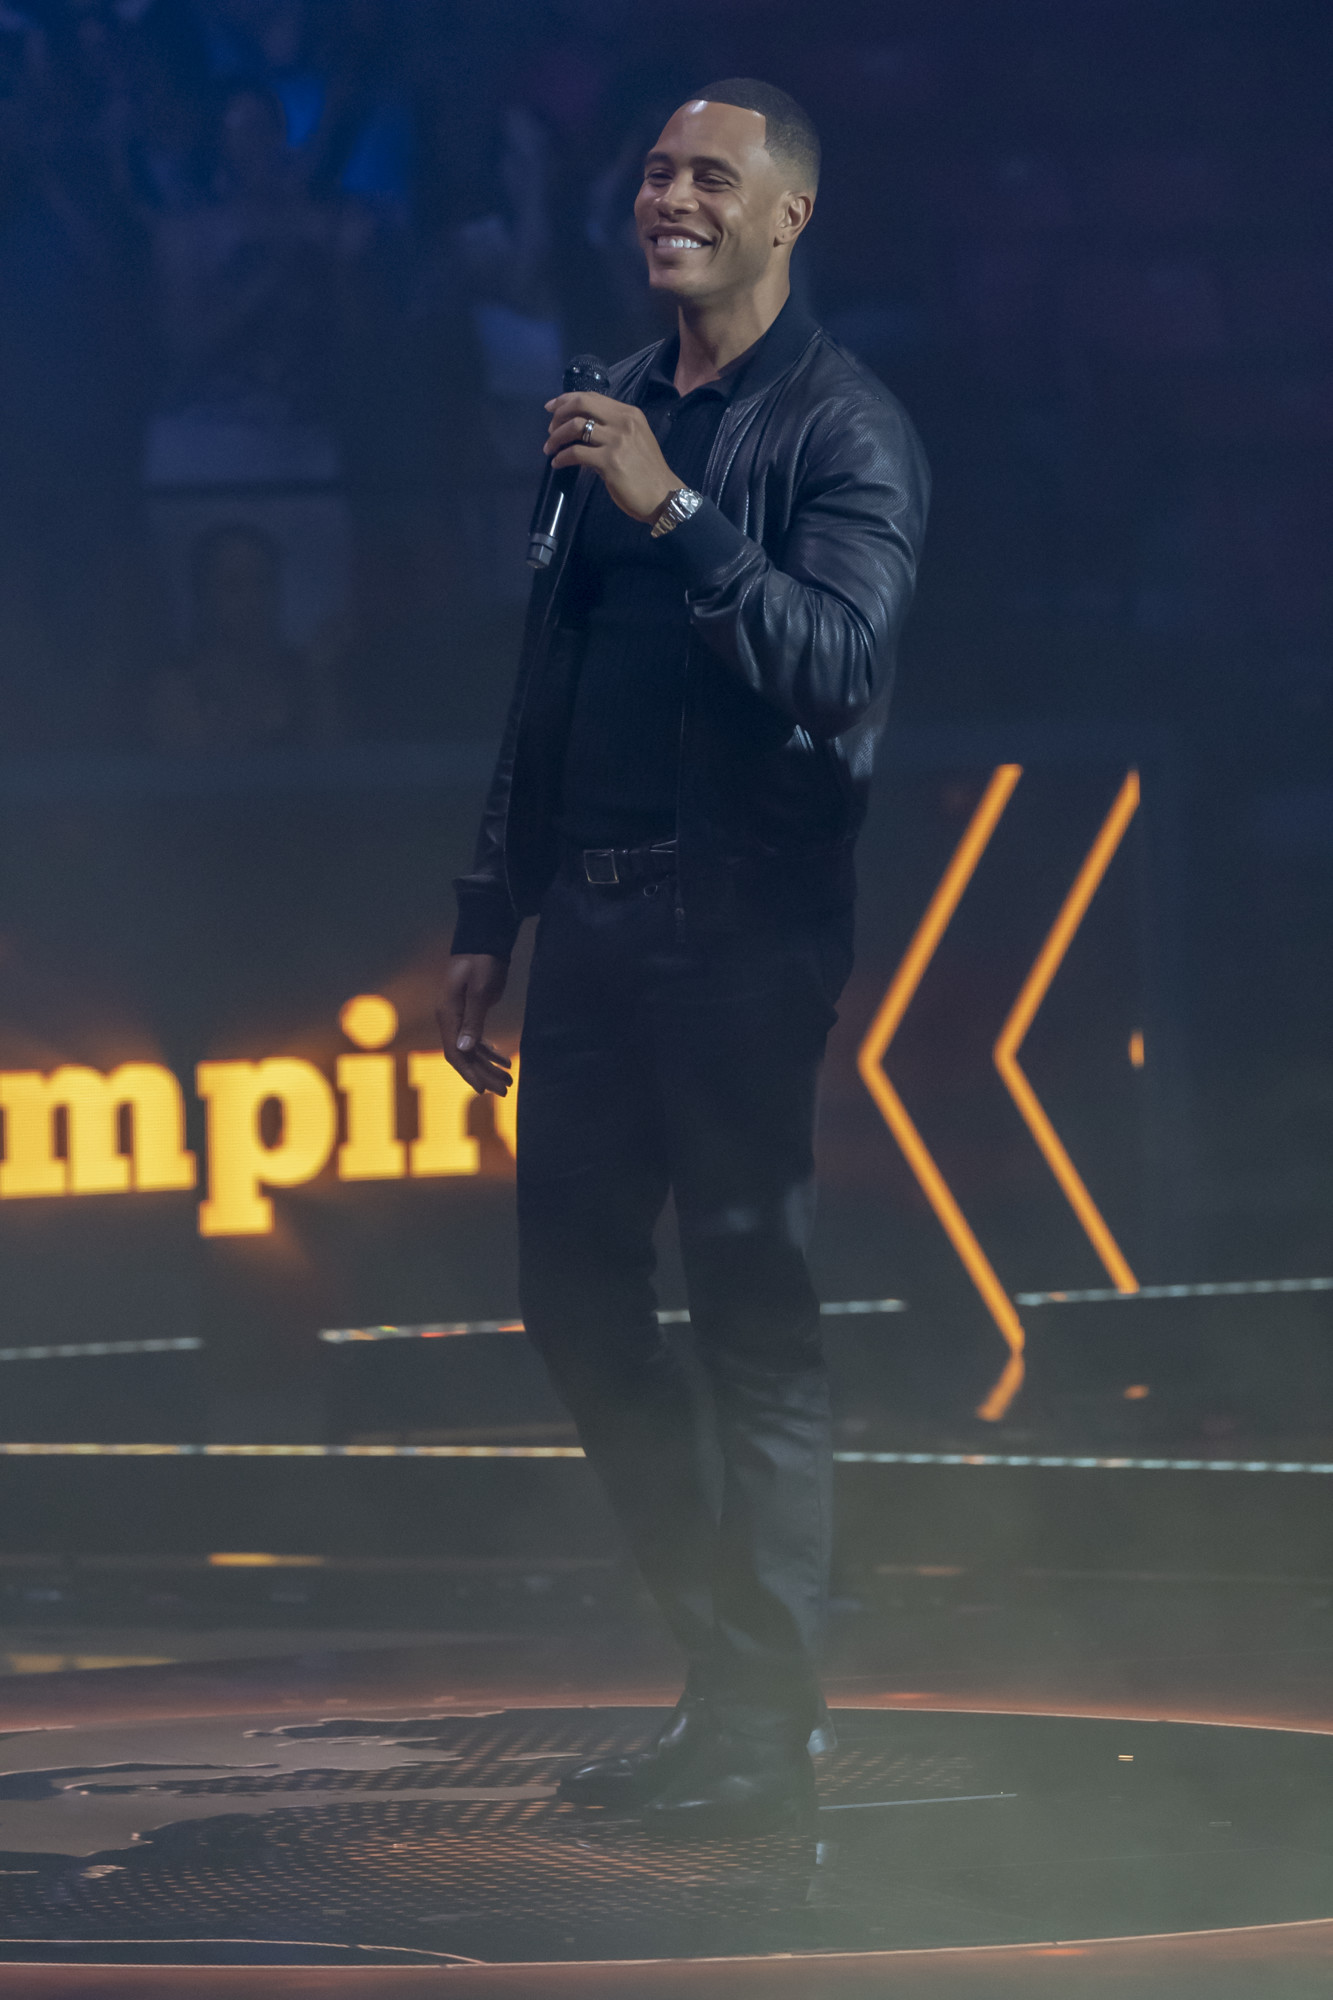 EMPIRE: L-R: Trai Byers in the "What Is Love" season premiere episode of EMPIRE airing Tuesday, Sept. 24 (9:00-10:00 PM ET/PT) on FOX. ©2019 Fox Broadcasting Co. All Rights Reserved. CR: Chuck Hodes/FOX.